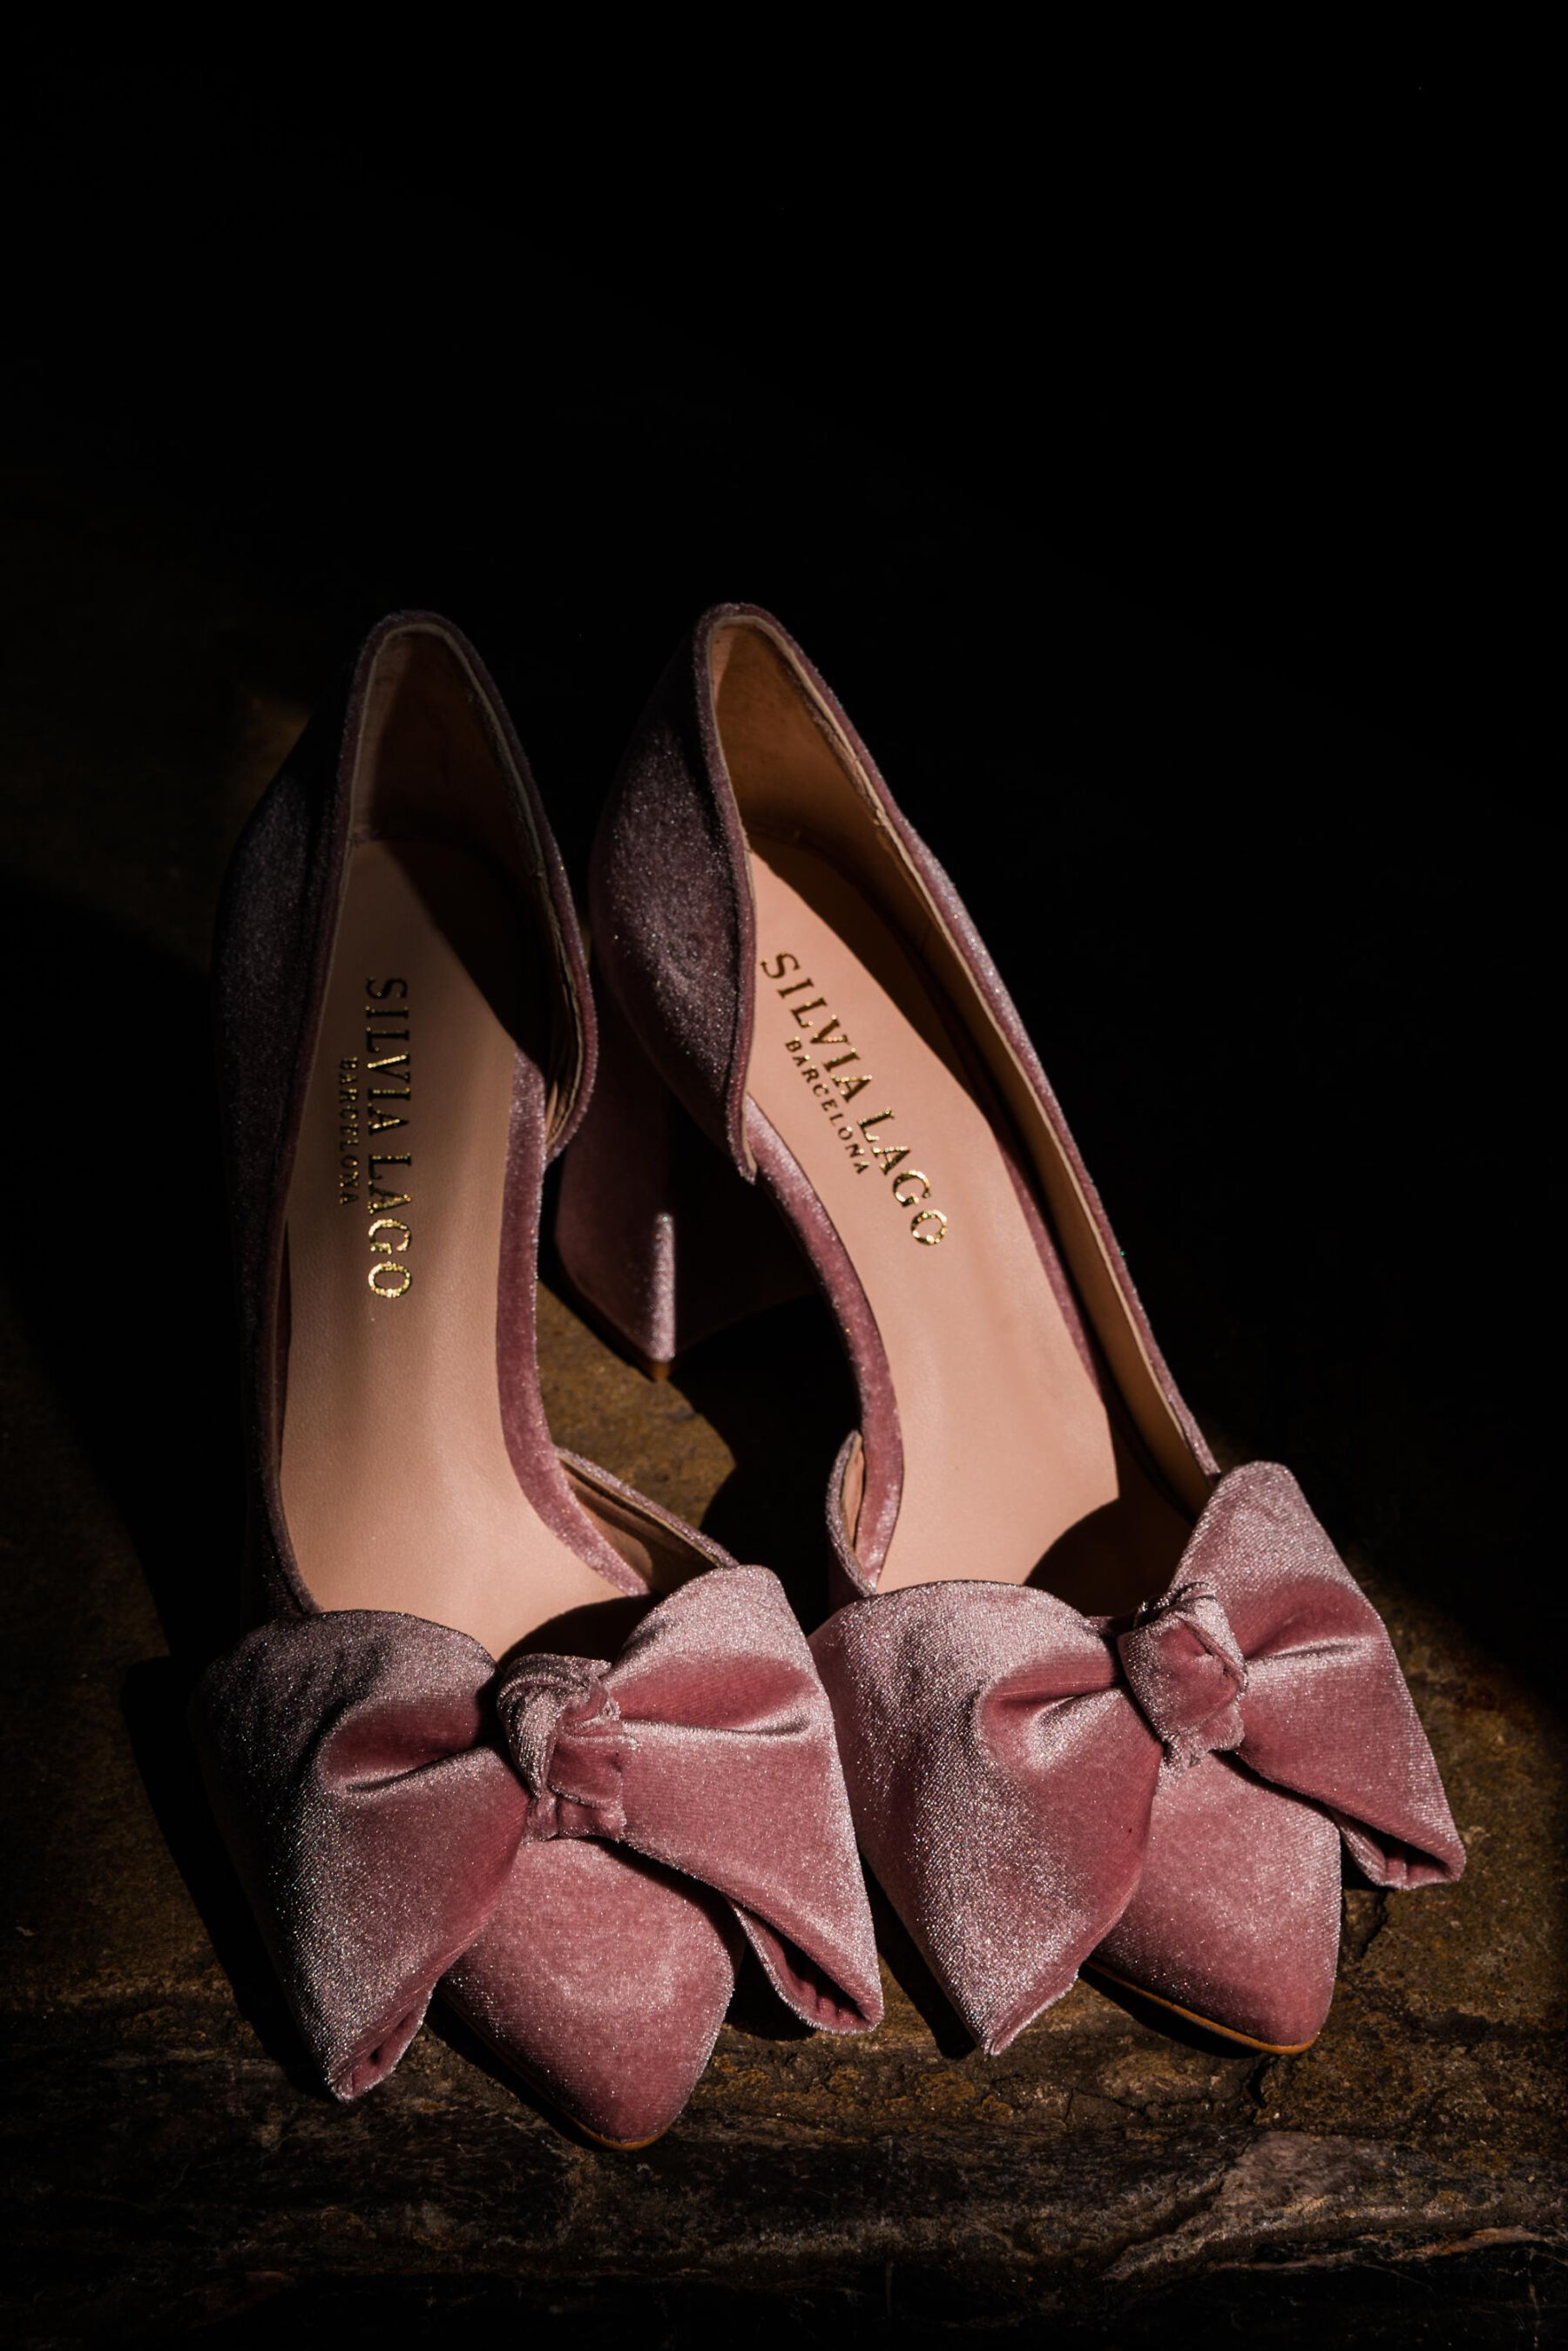 Pink velvet shoes with a bow